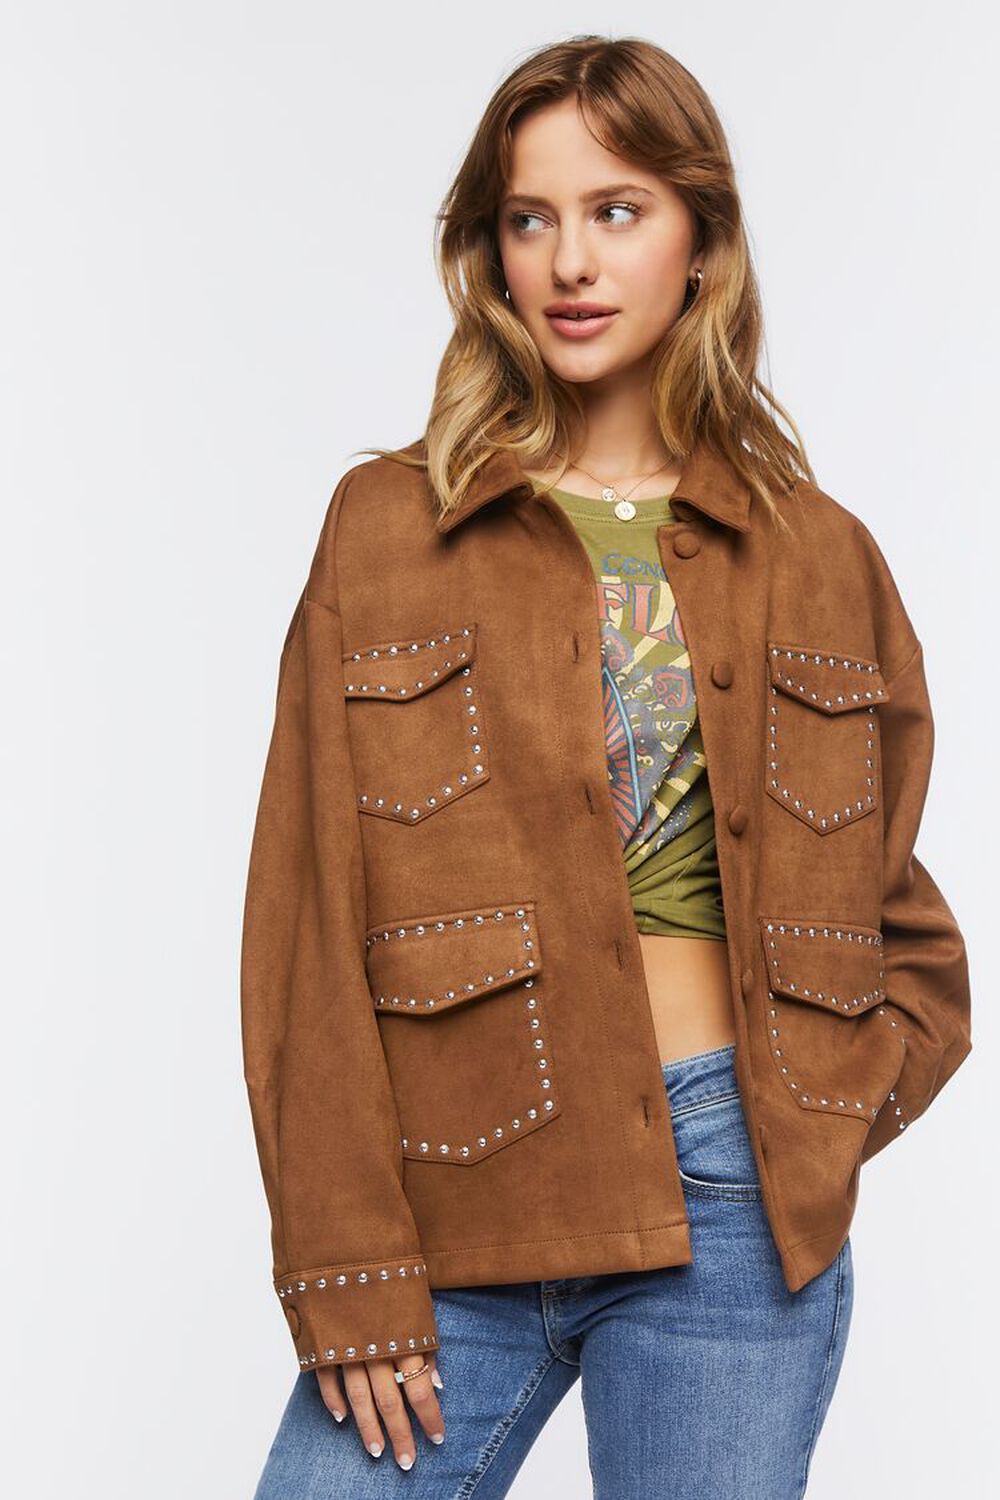 BROWN Faux Suede Studded Shacket, image 1